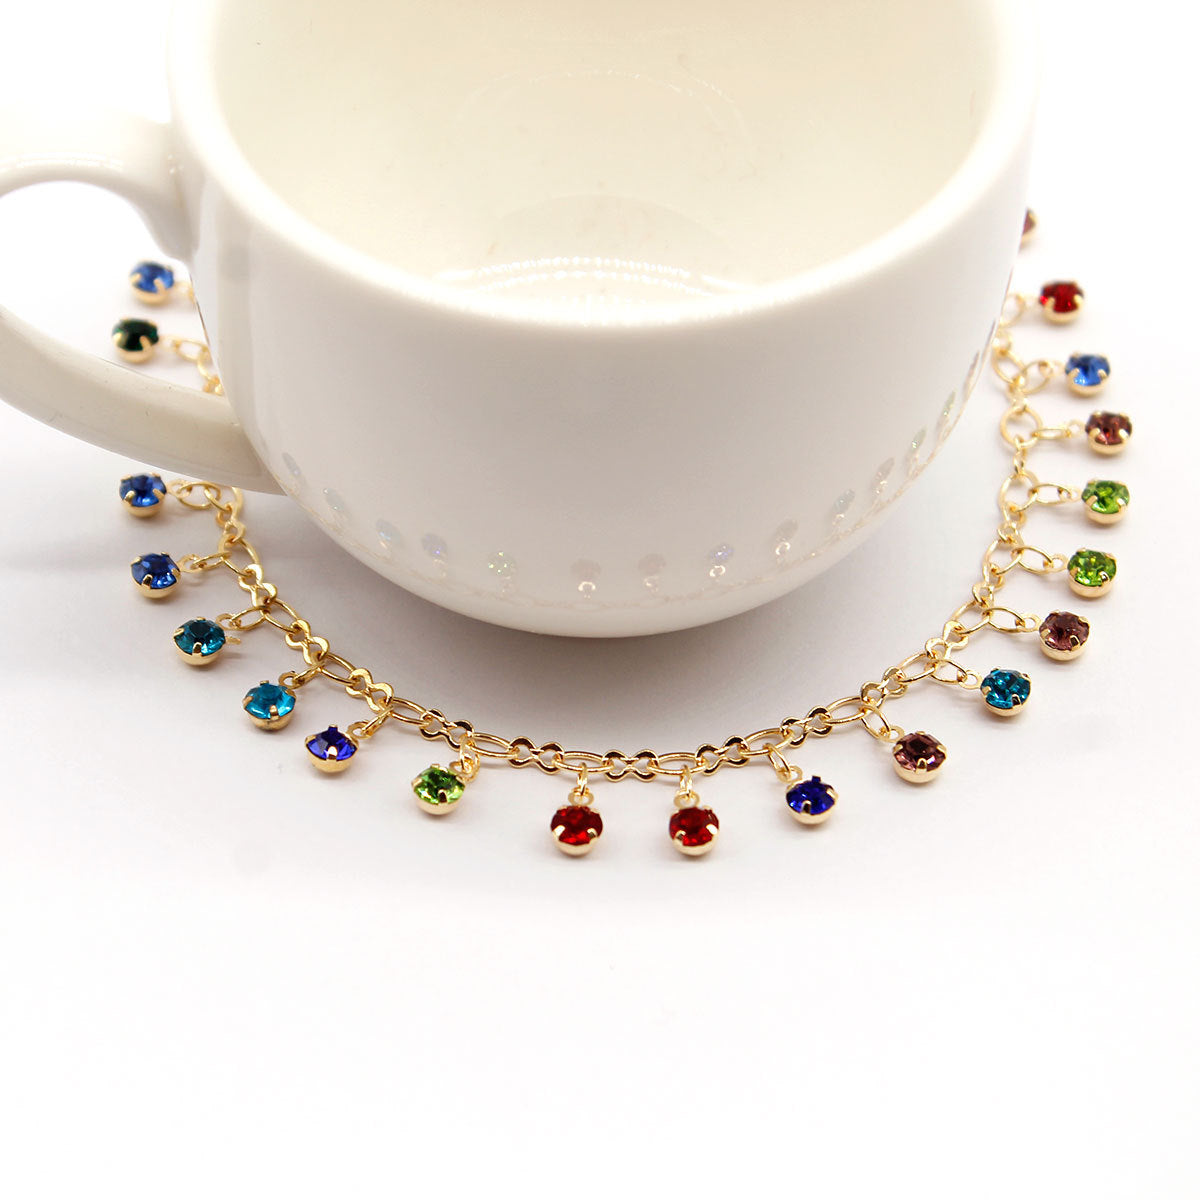 Women's Crystal Micro Inlaid Colorful Diamond Ankle Chain